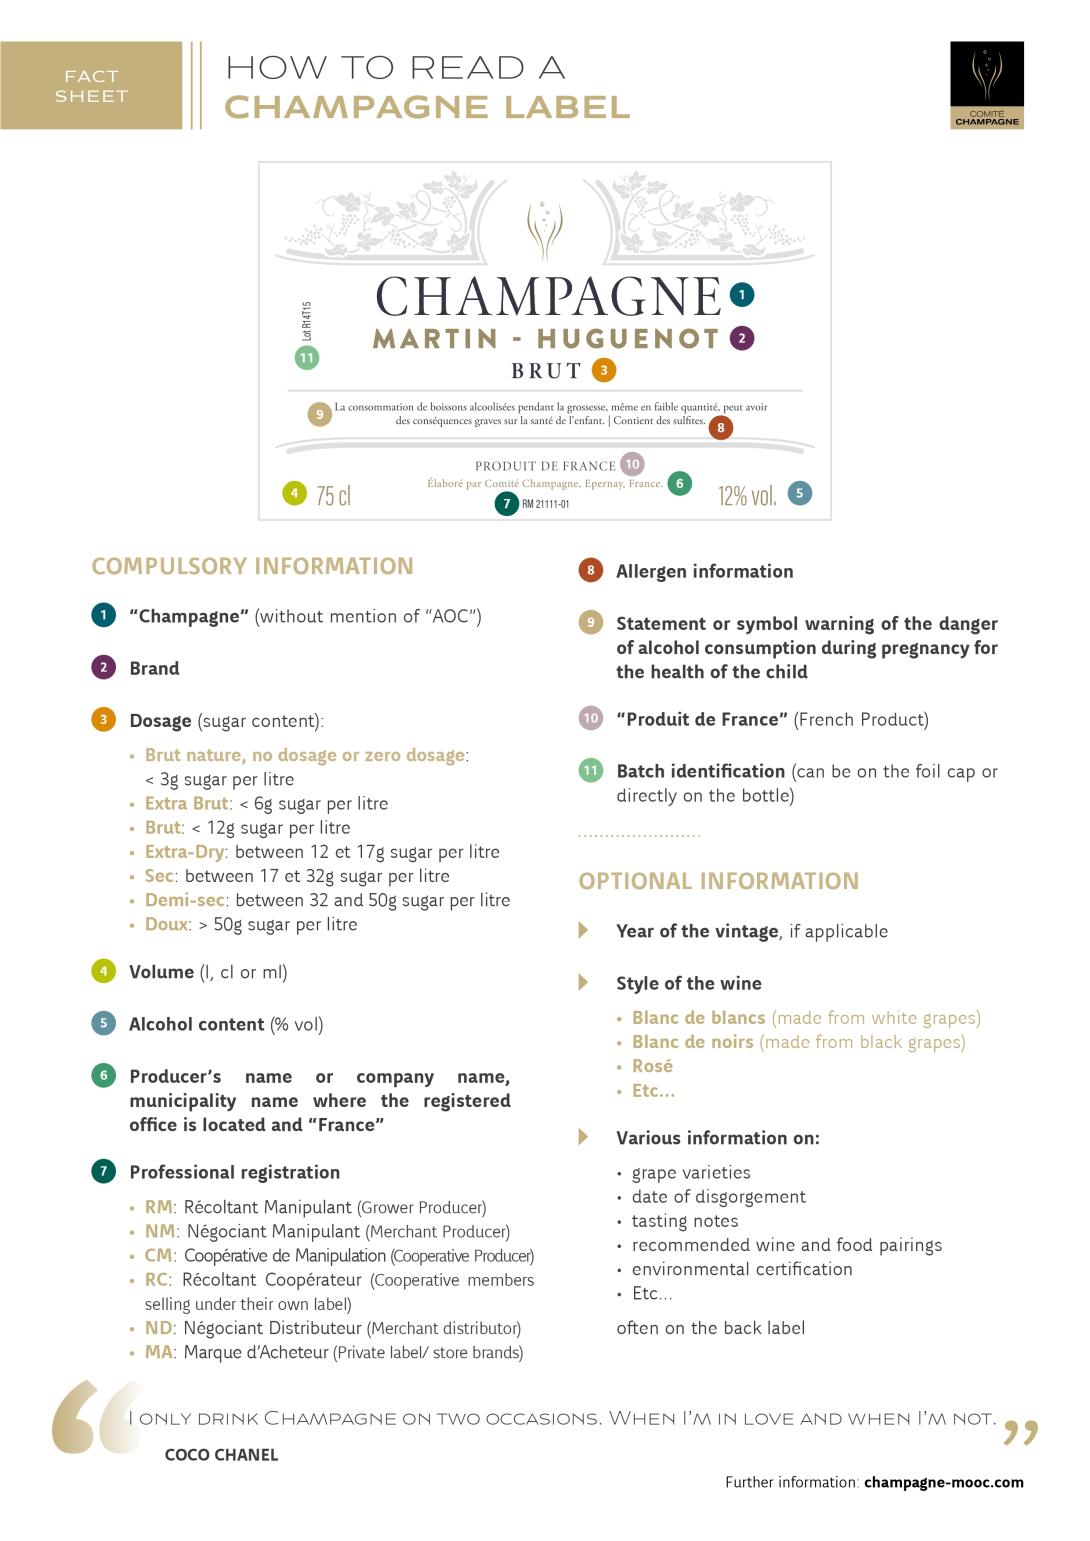 How to read a Champagne label